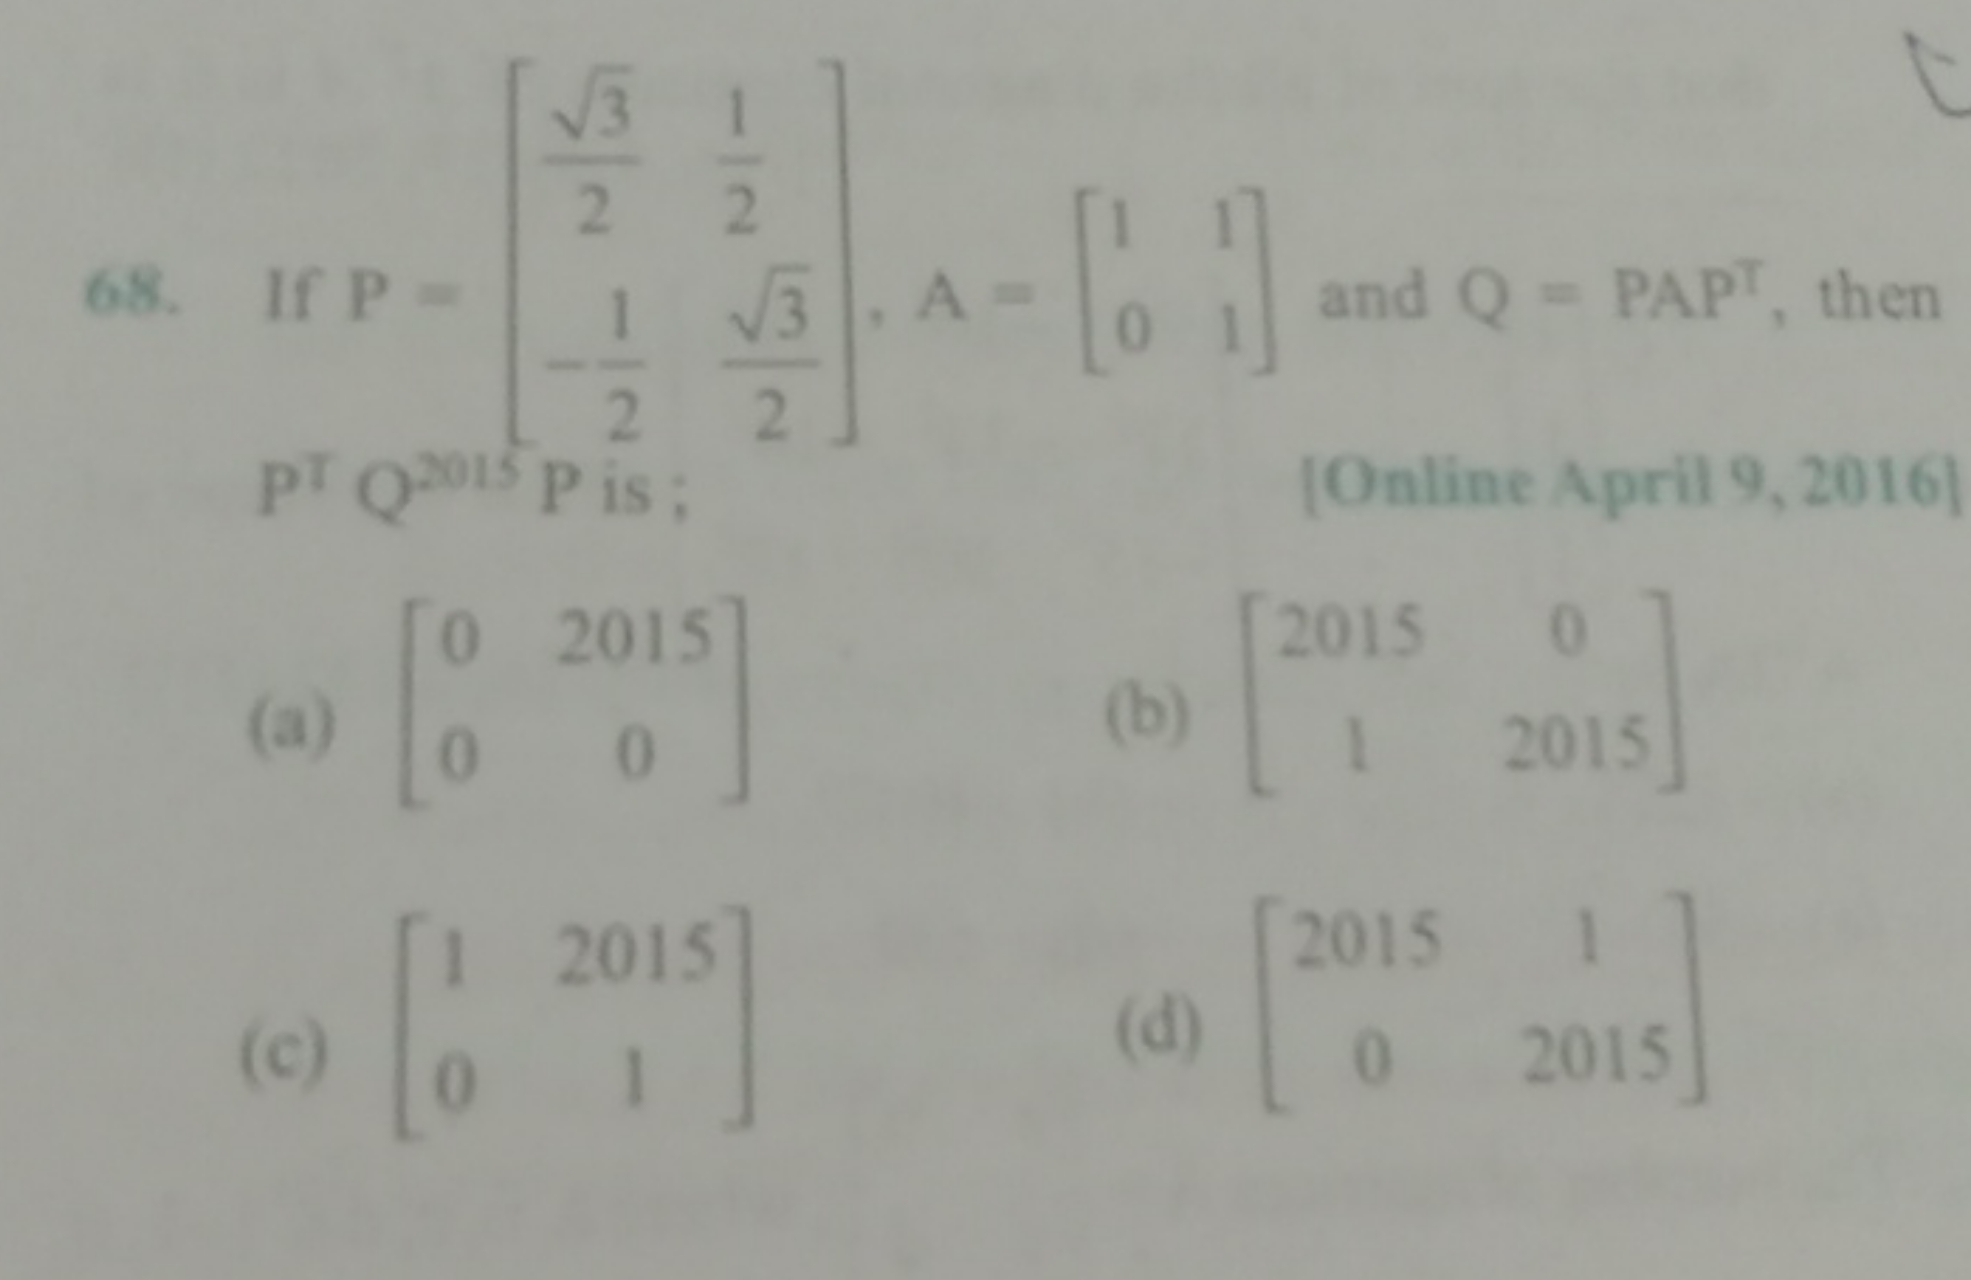 If P=[23​​−21​​21​23​​​],A=[10​11​] and Q=PAPT, then PTQ2015P is ; [On